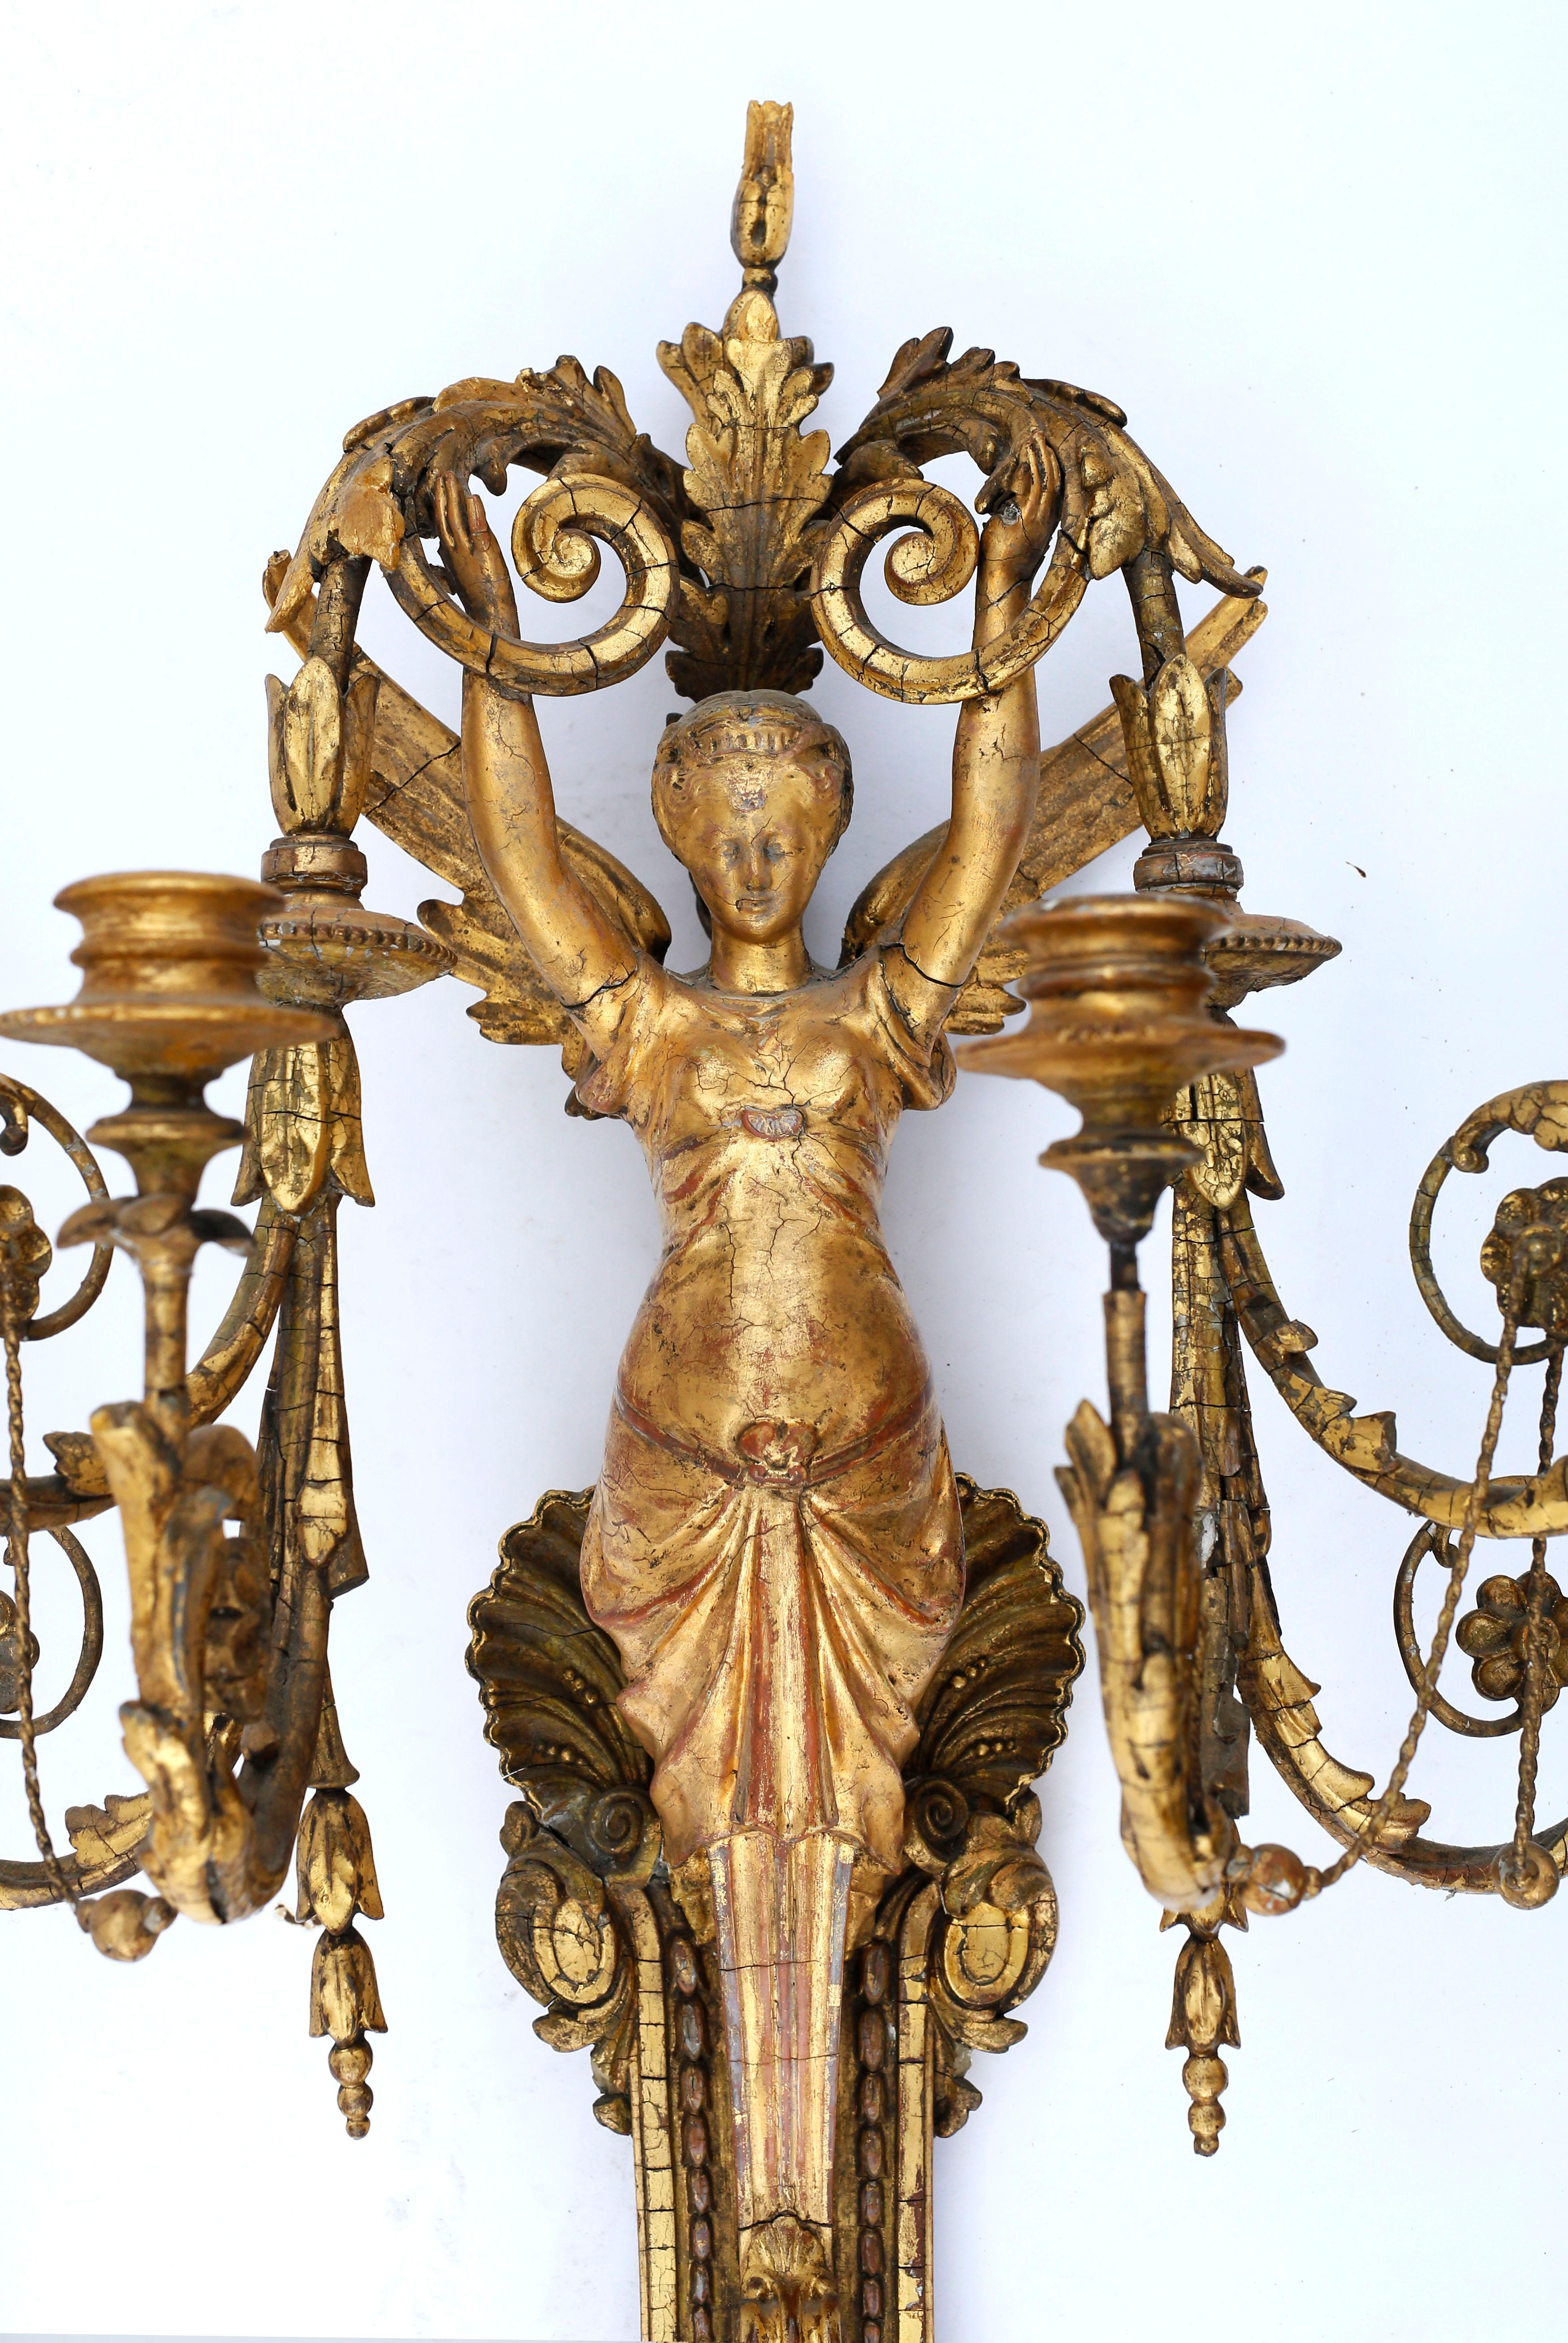 Pair of Early 19th Century Italian Neoclassical Gilt Figural Six-Light Sconces In Good Condition For Sale In Brooklyn, NY